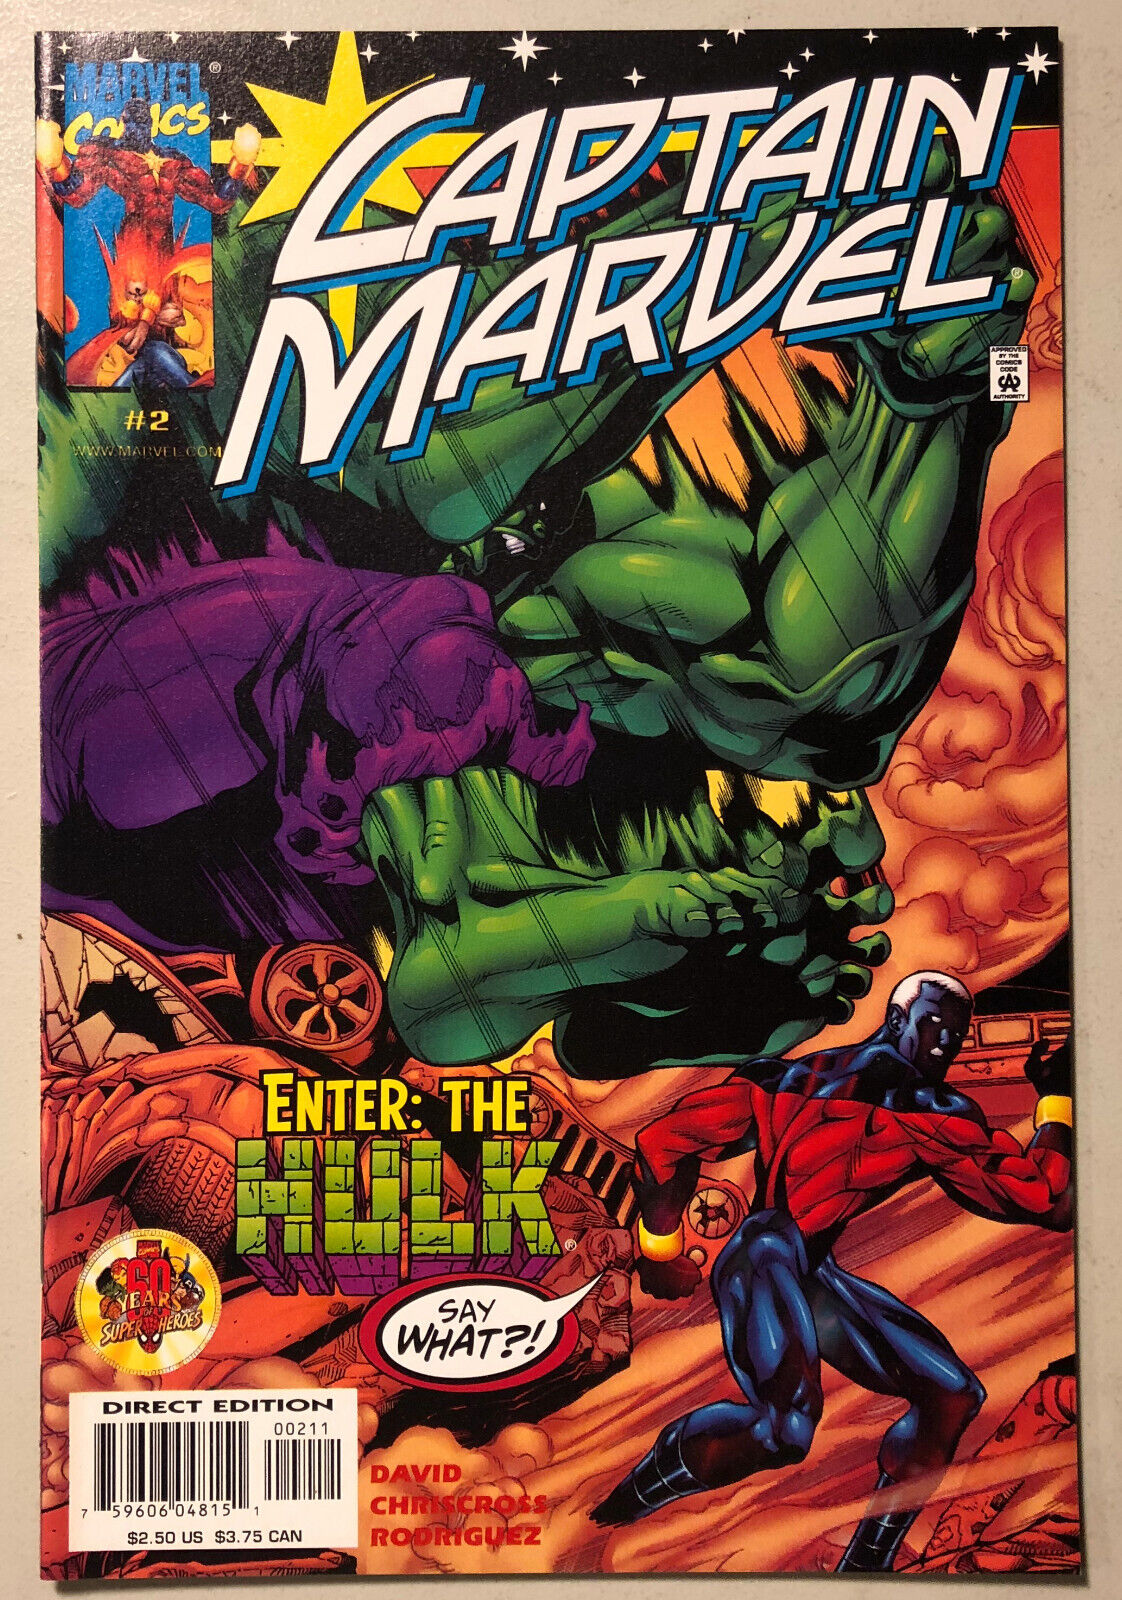 CAPTAIN MARVEL 1999 #2 HIGH GRADE PETER DAVID - 25 CENT COMBINED SHIPPING